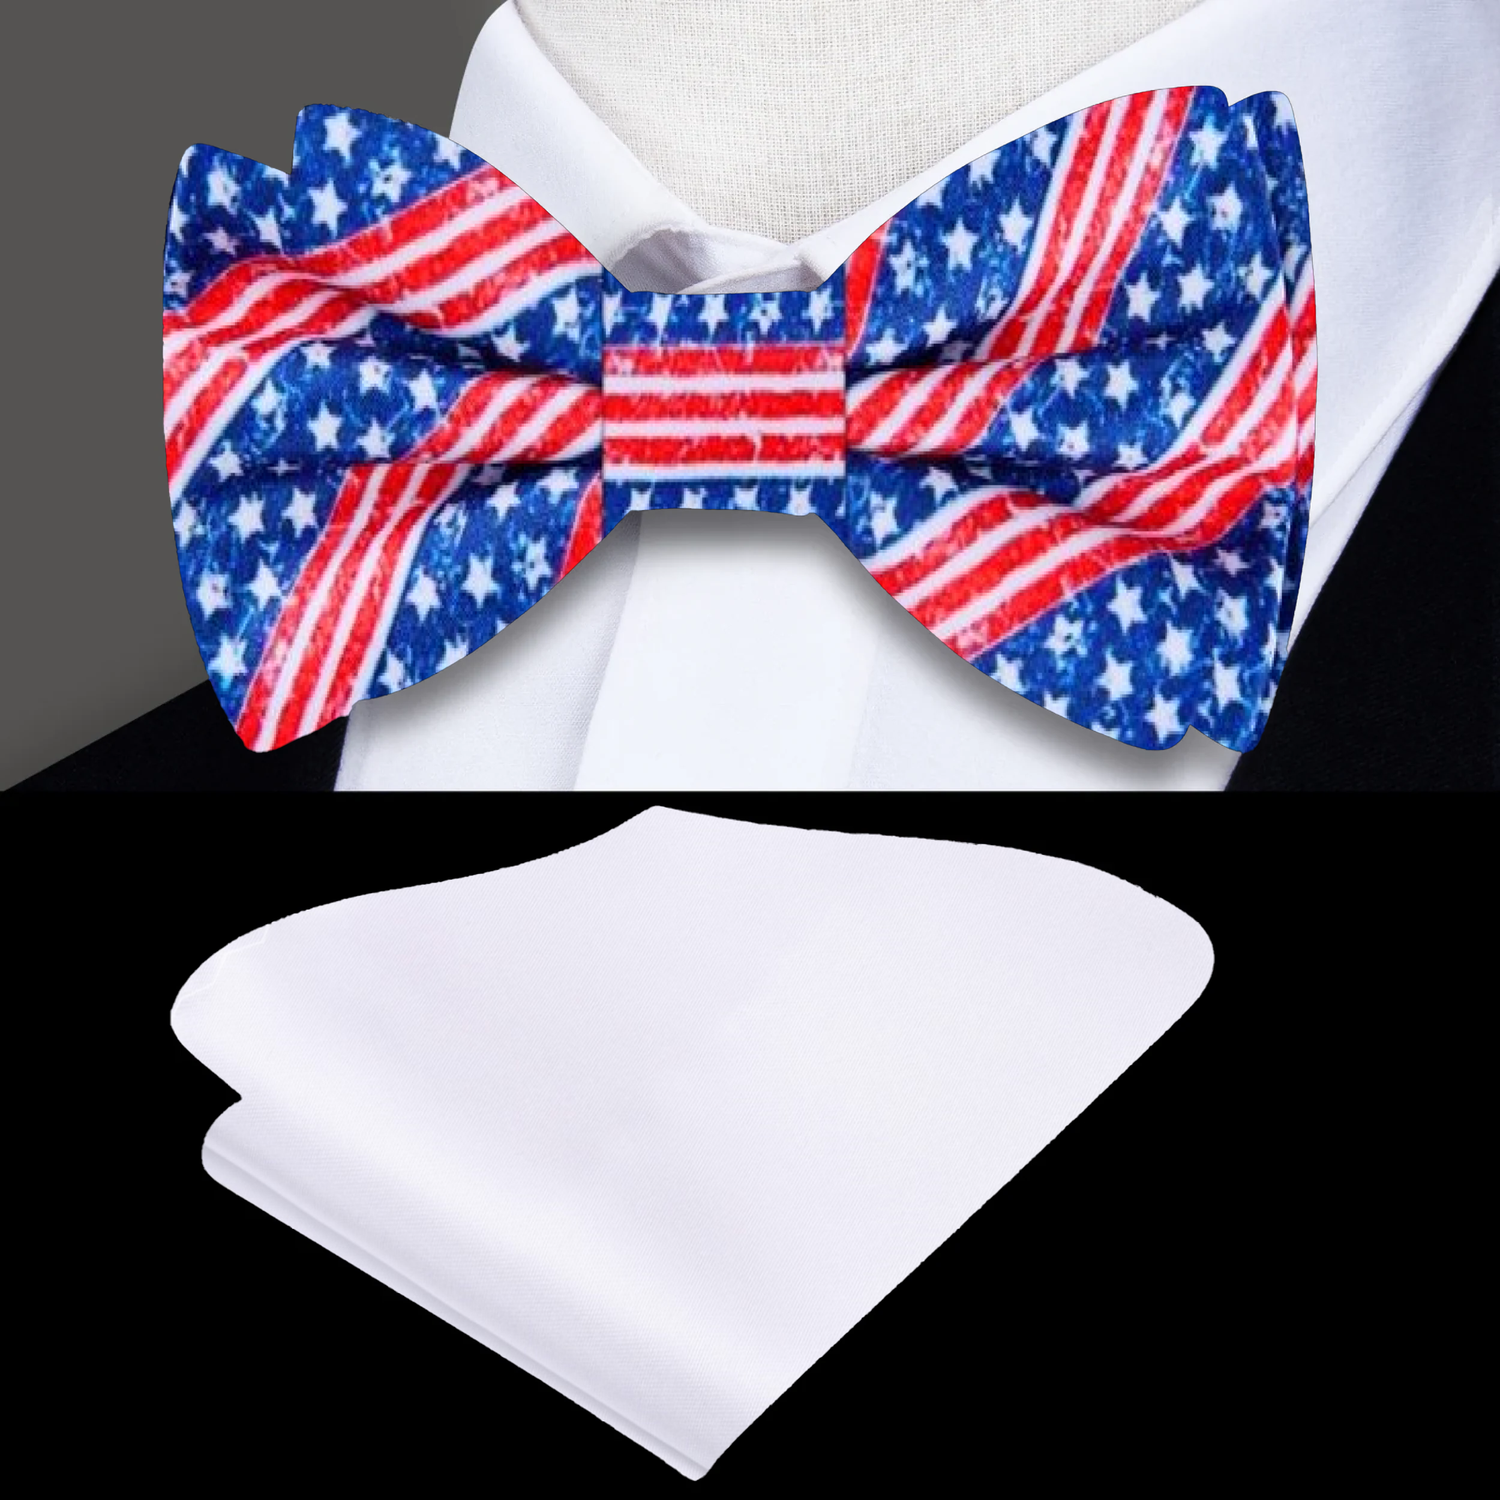 Blue, Red, White Stars and Stripes Bow Tie and White Square